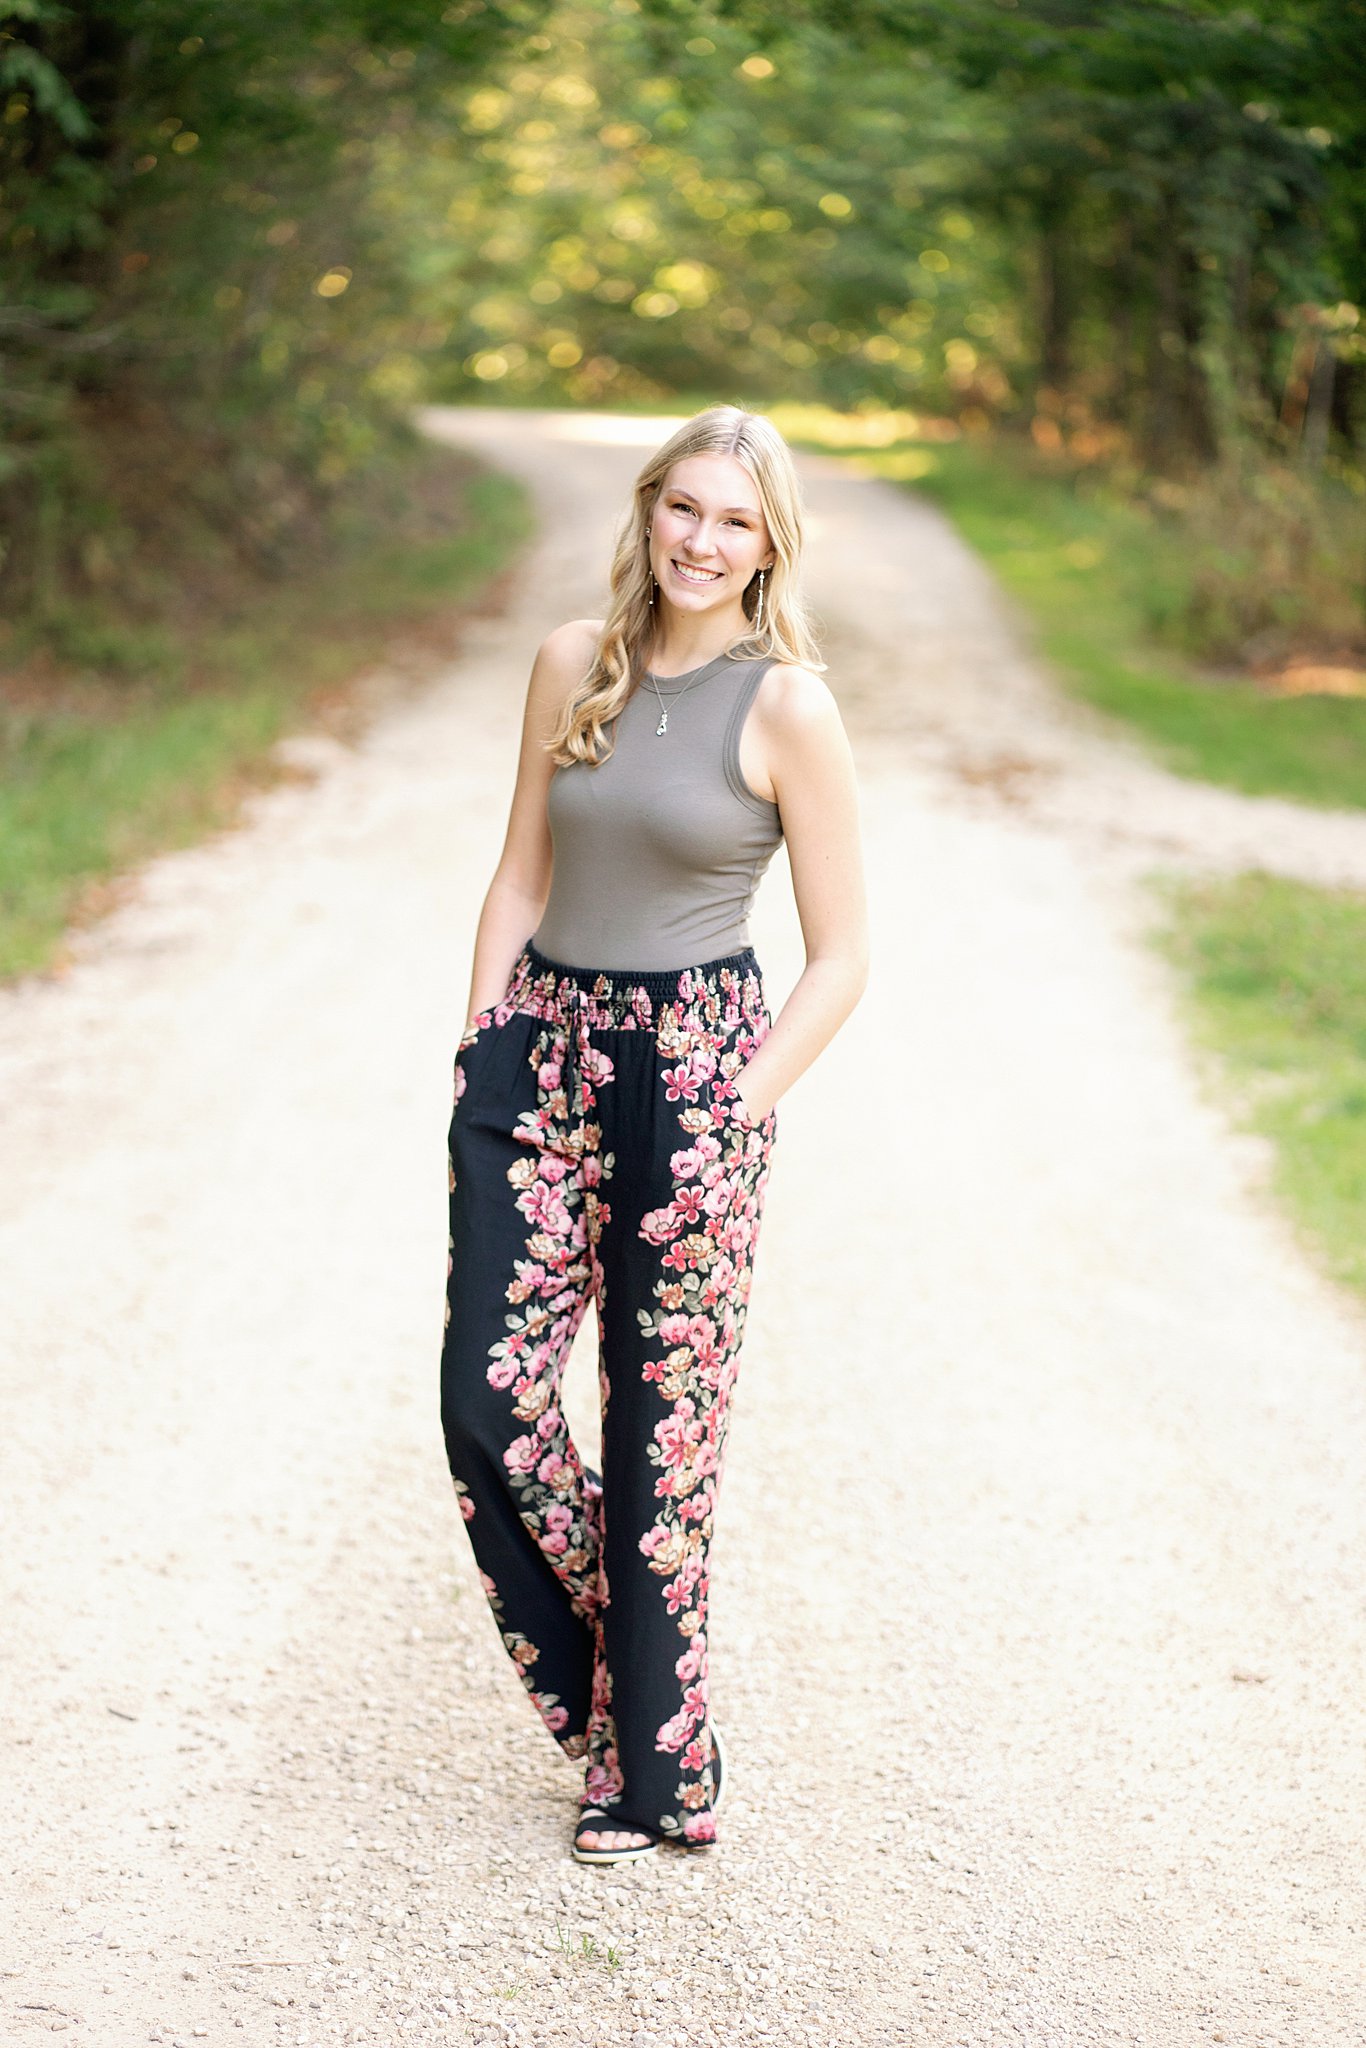 high school senior in grey top and floral pants from clothing boutiques in Rochester MN standing in the road